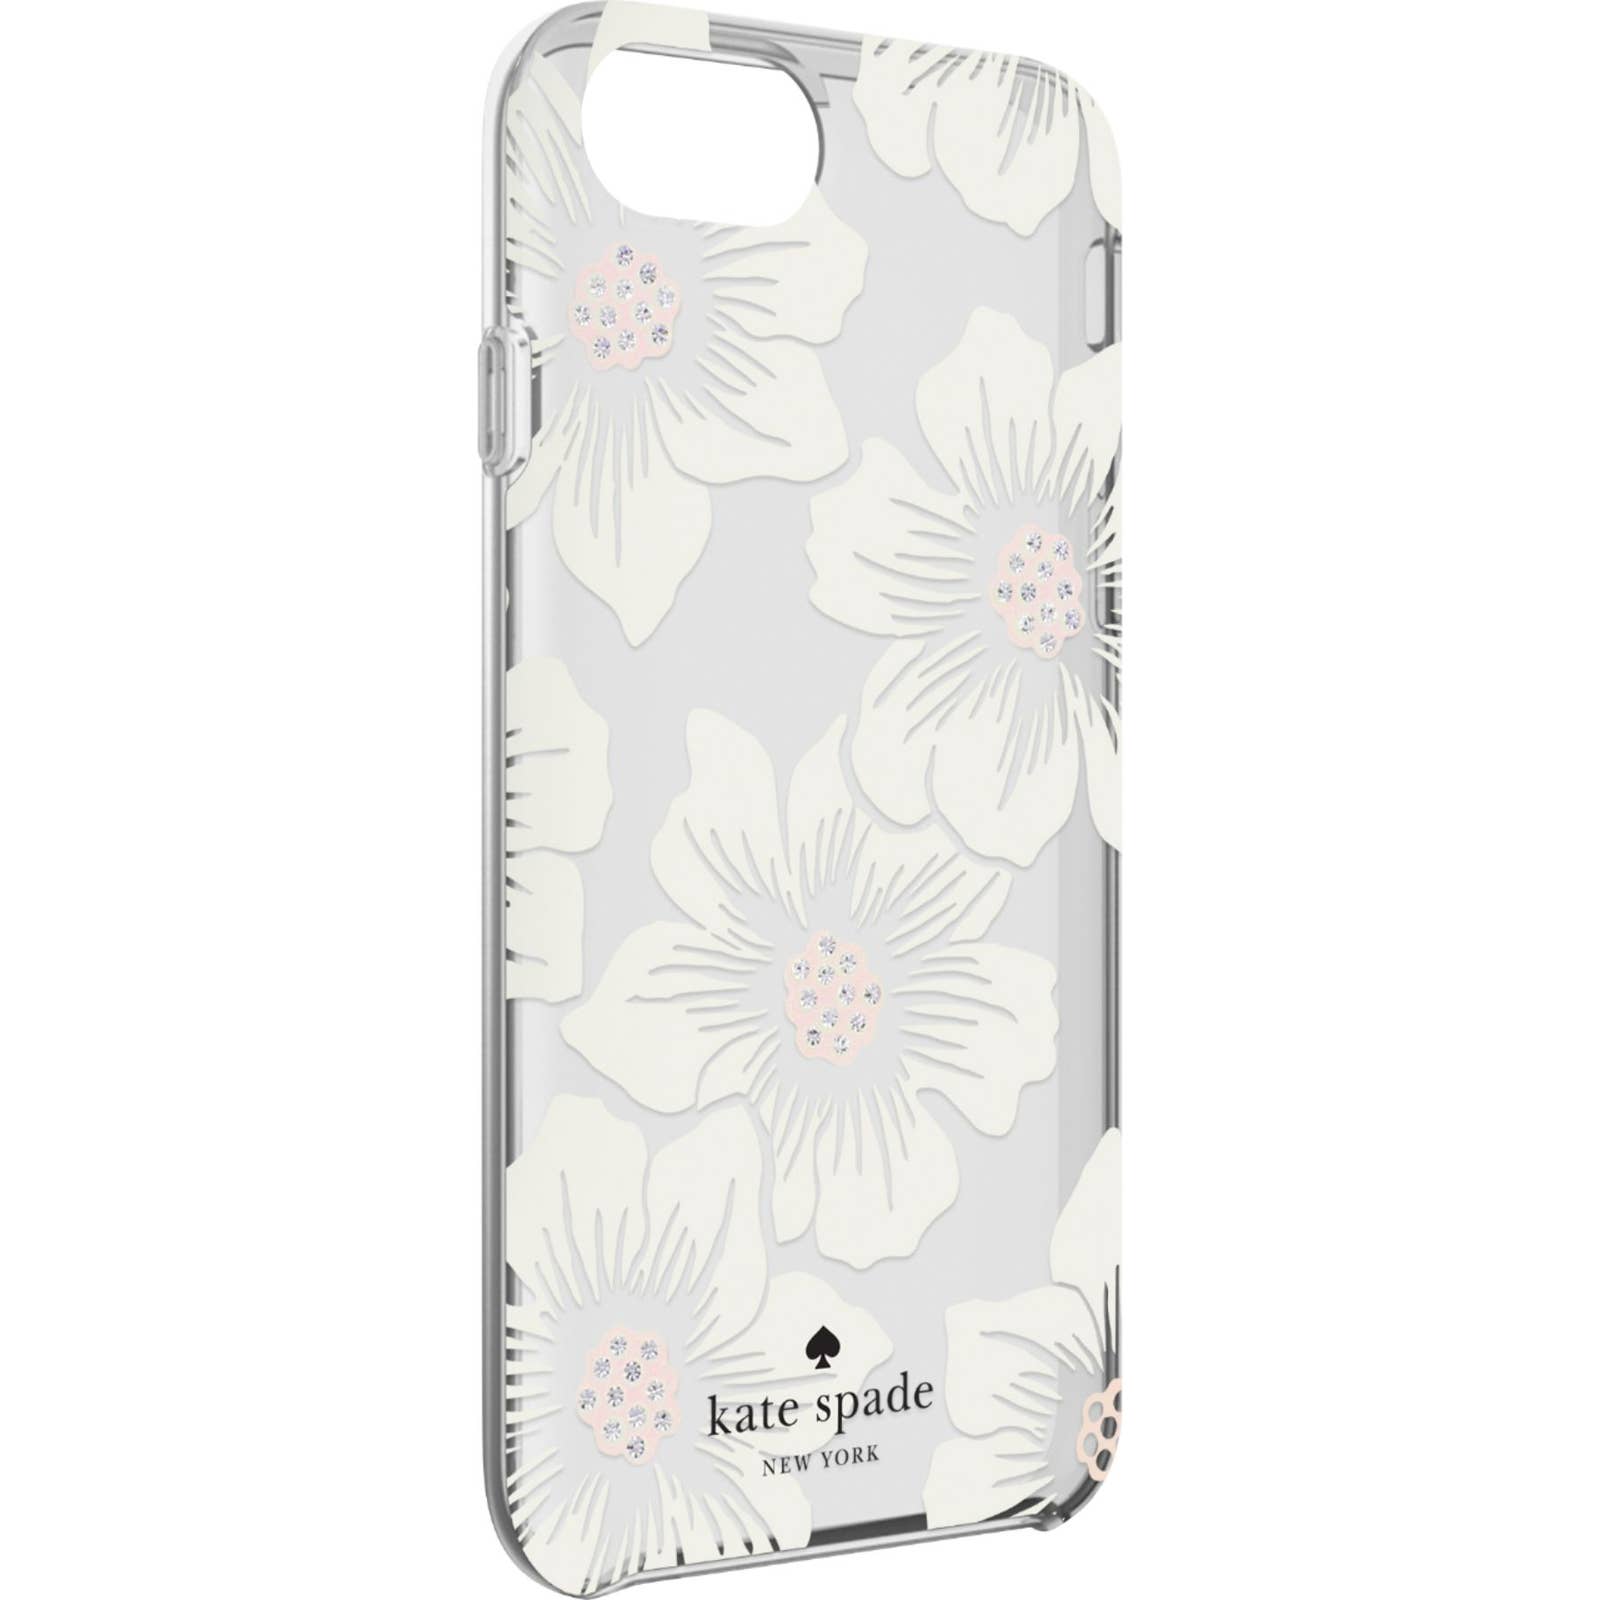 kate spade new york - KSIPH-055-HHCCS Protective Hardshell Case for Apple® iPhone® SE (3rd Generation) and iPhone® 8/7/6/6s - Hollyhock Floral Clear/Cream with Stones